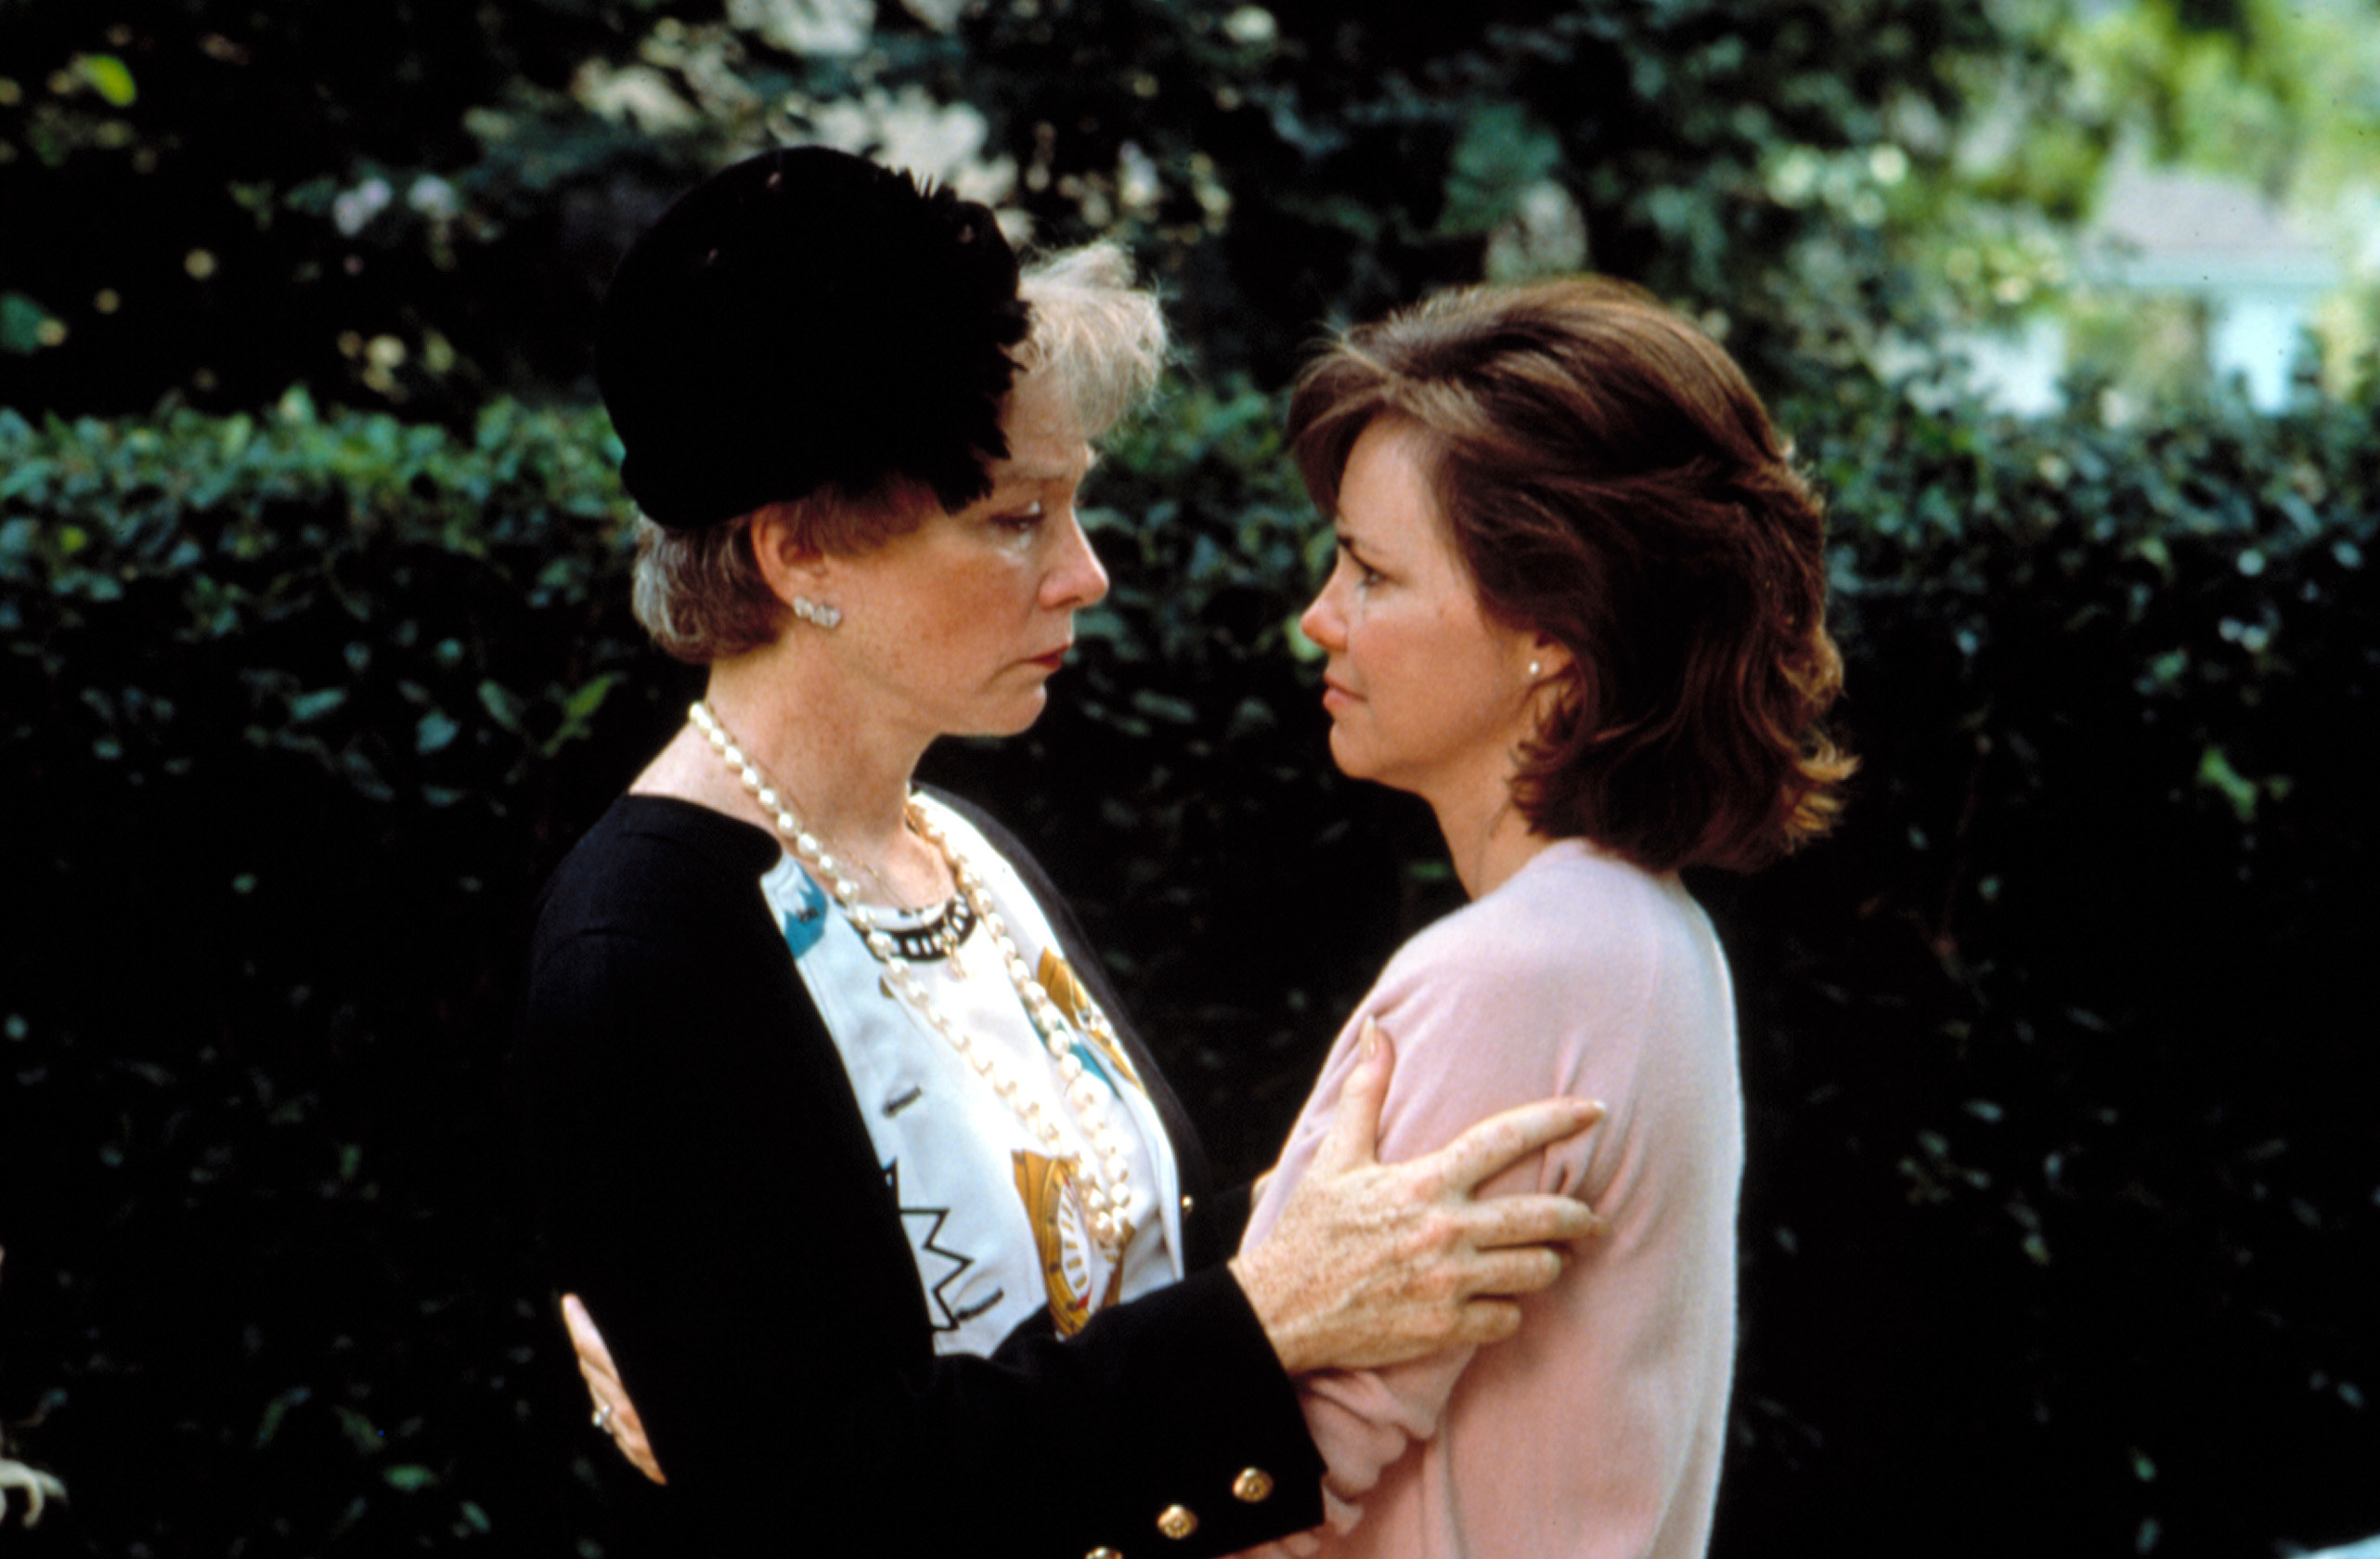 Shirley MacLaine and Sally Field embrace at a sad event